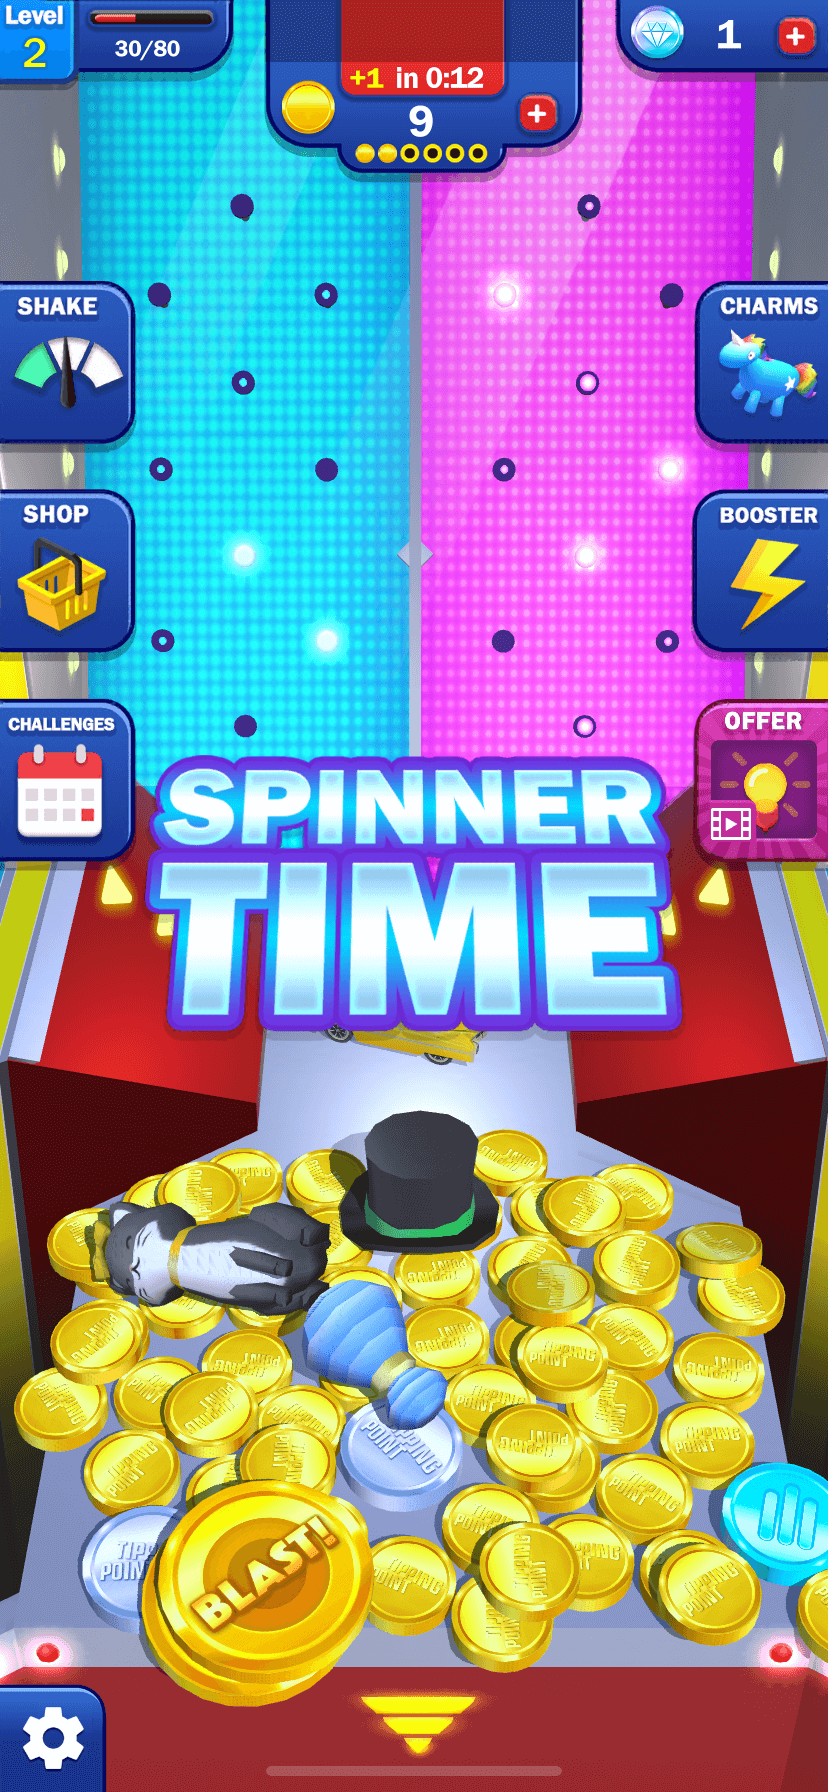 spinner time.PNG